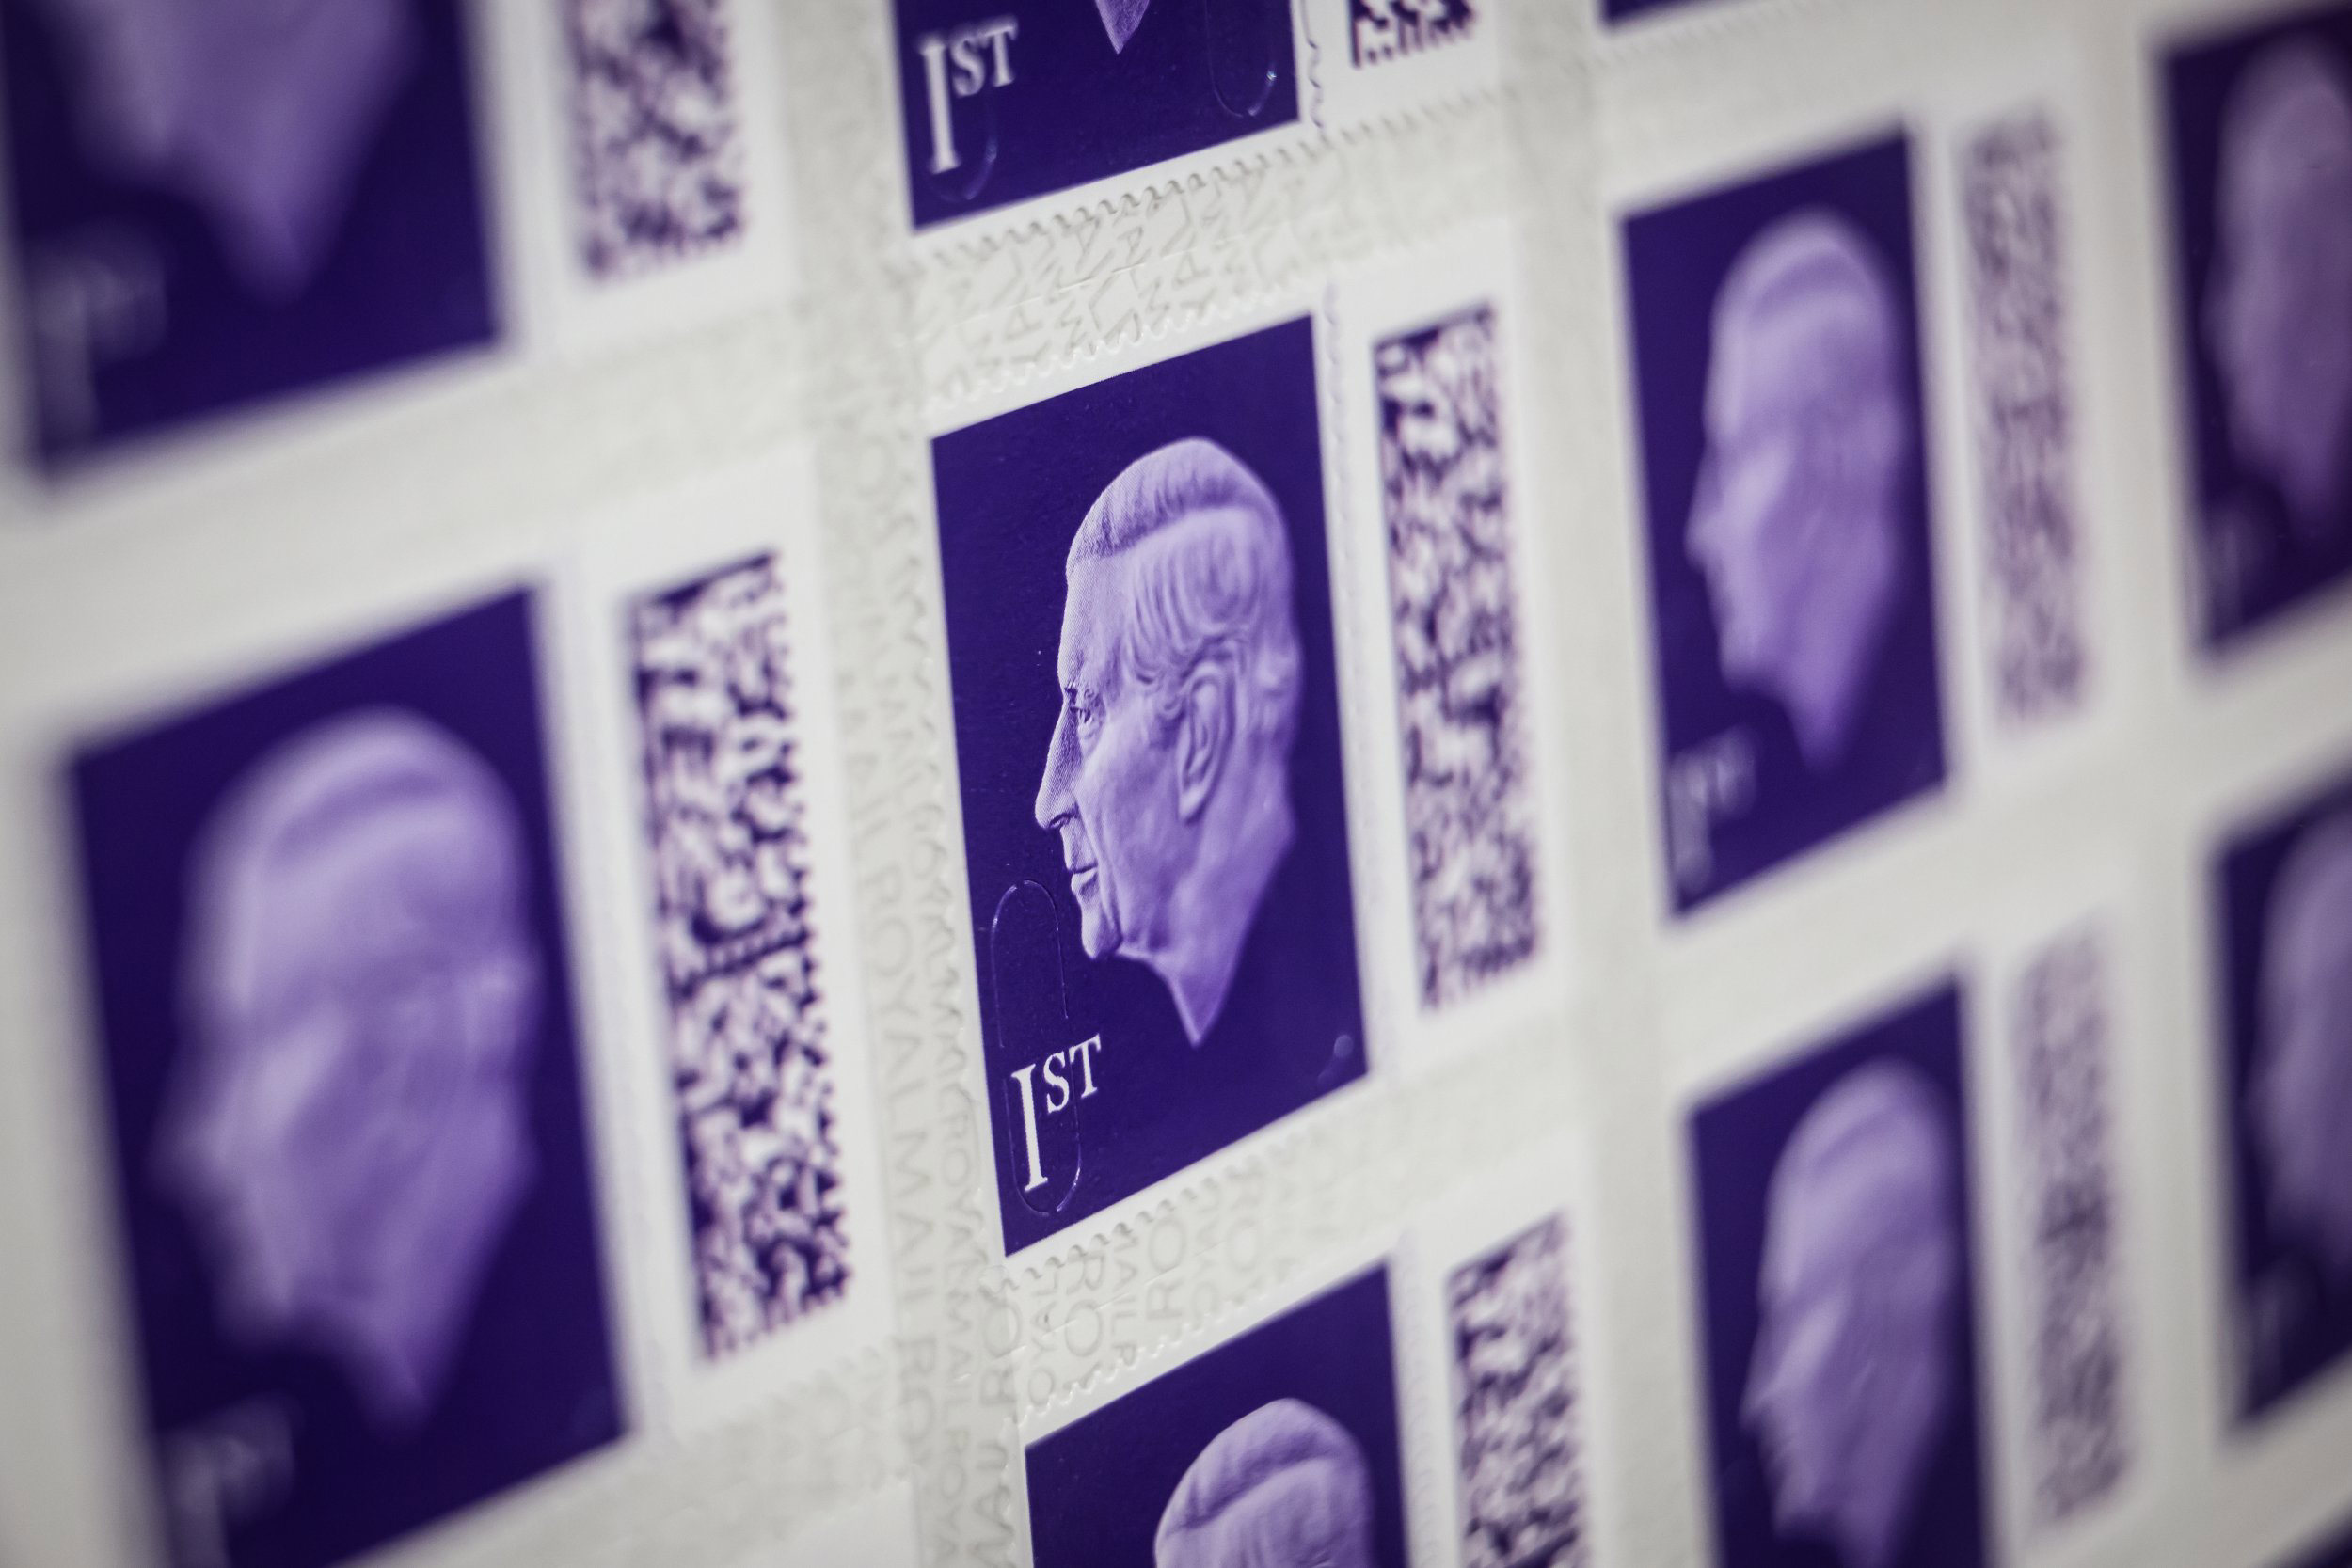 When do stamps go up in price? The Royal Mail price increase and how much 1st or 2nd class